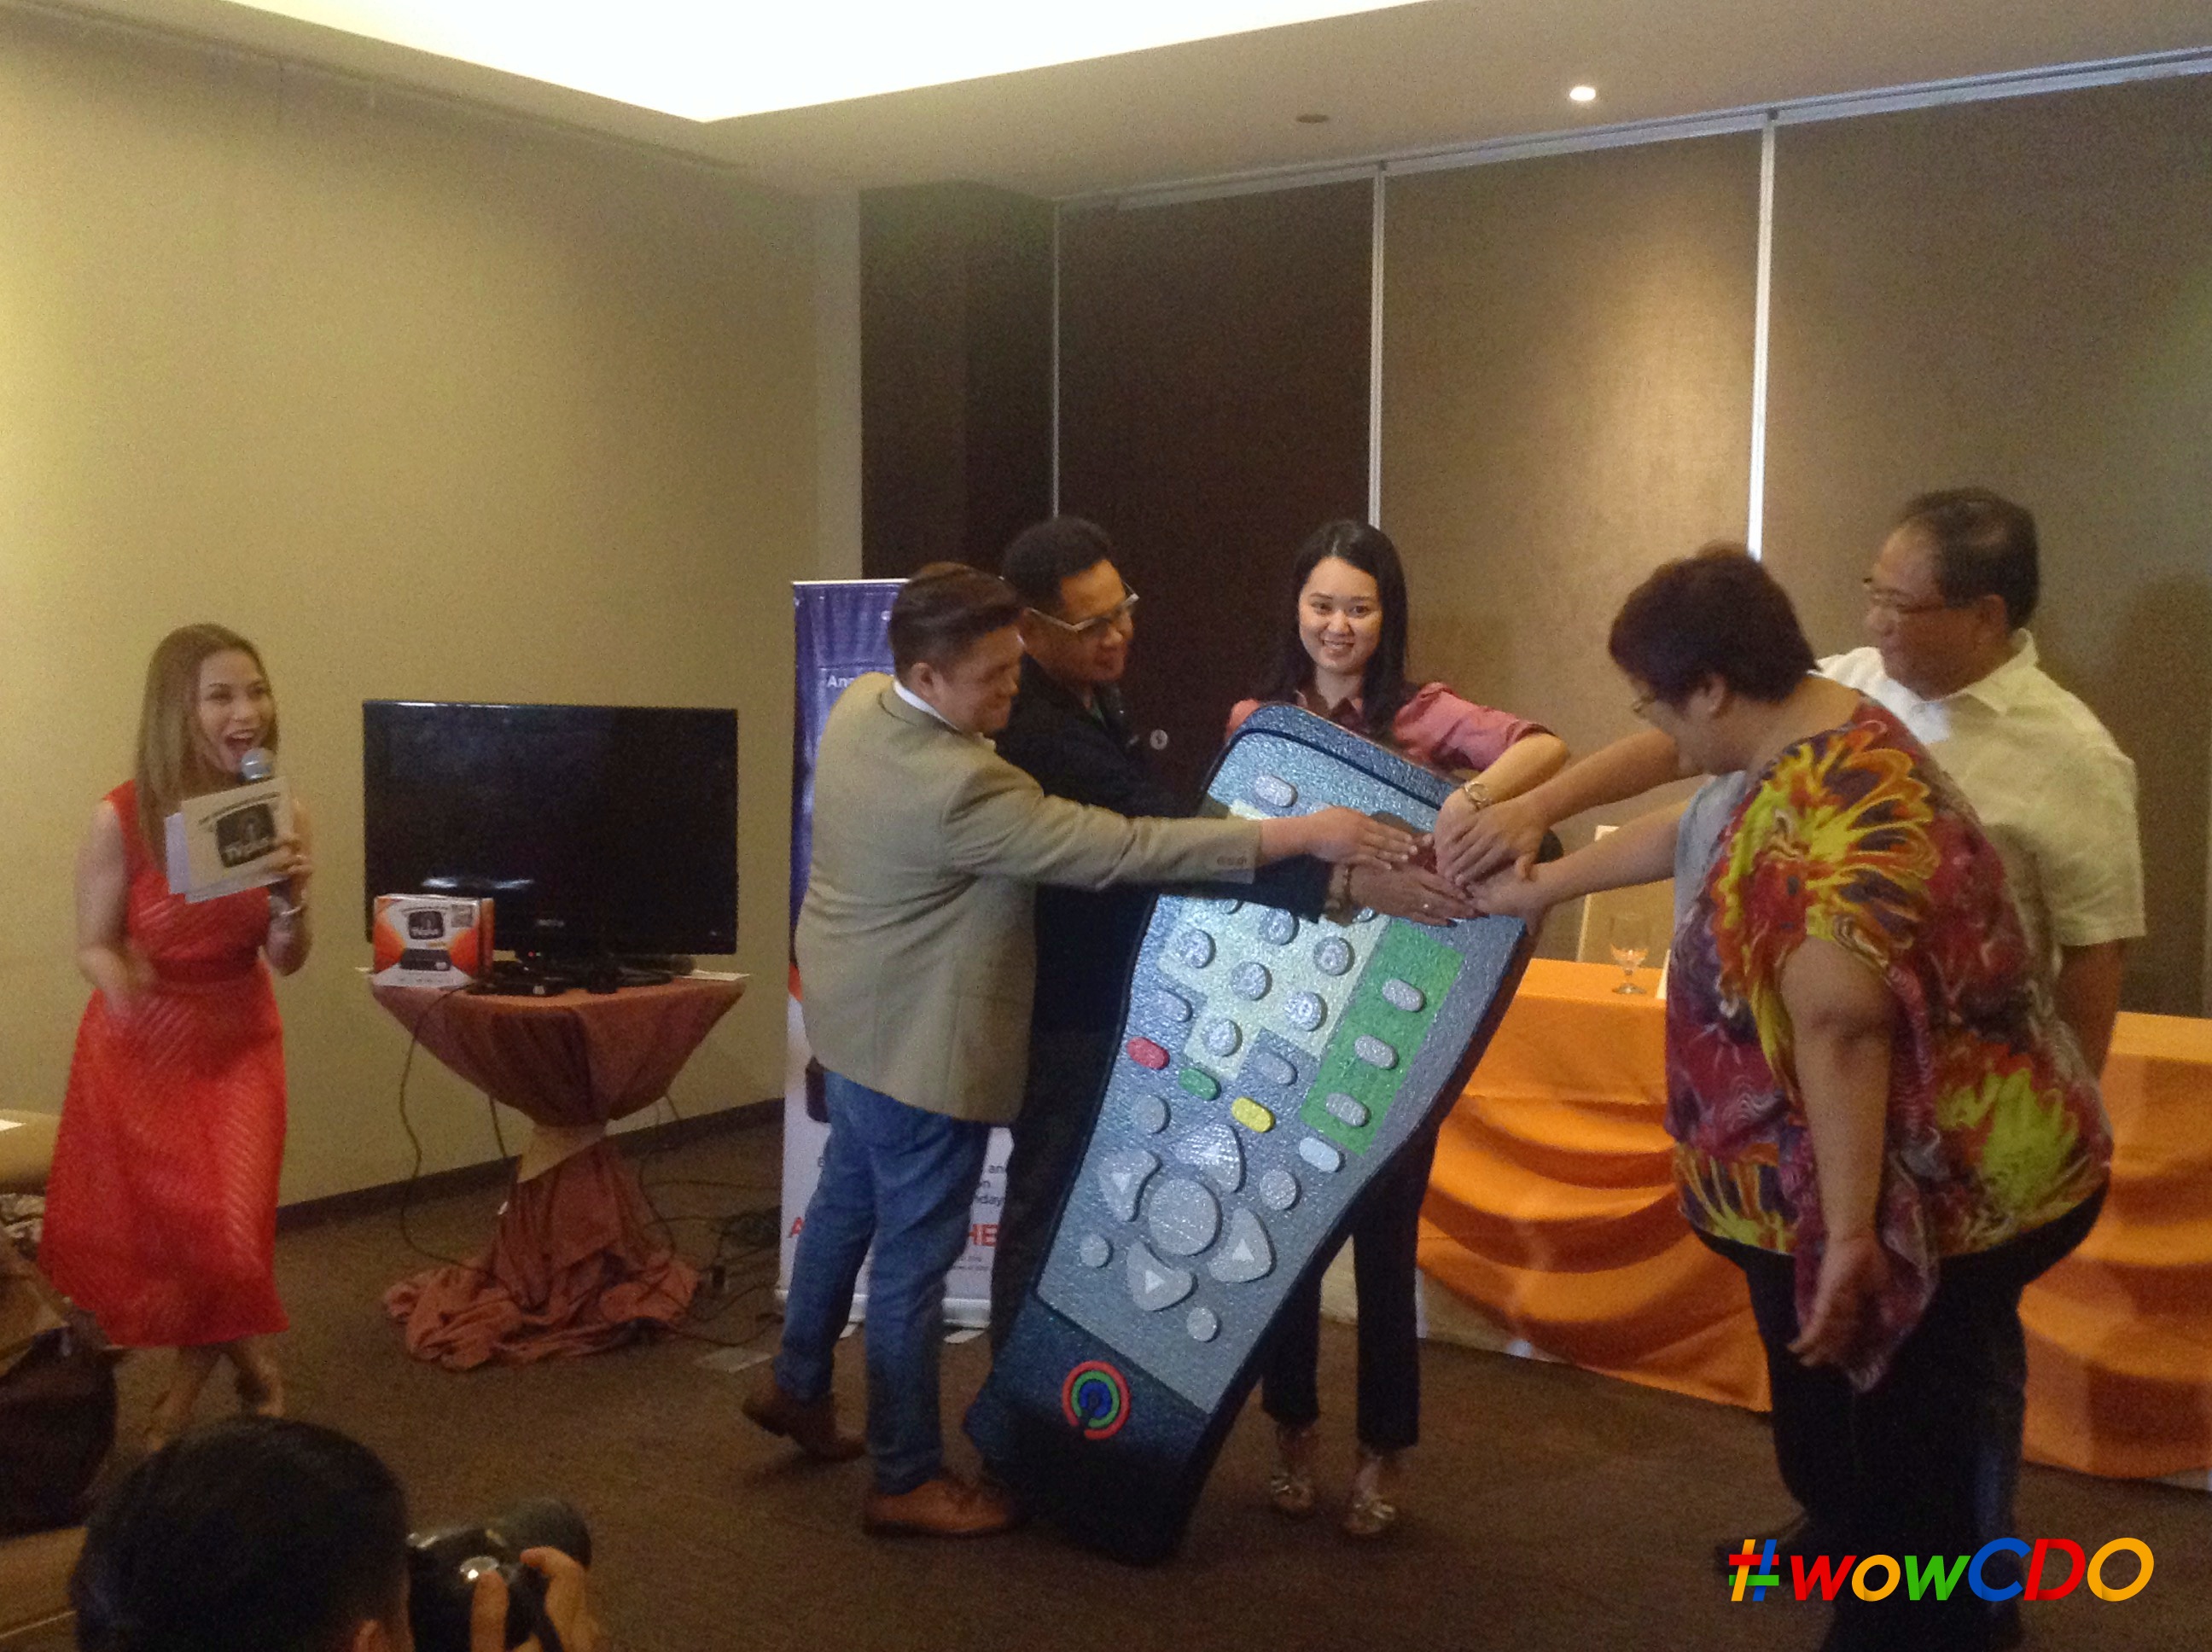 Experience Digital TV with ABS-CBN TVplus – the “Mahiwagang Black Box” now in CDO